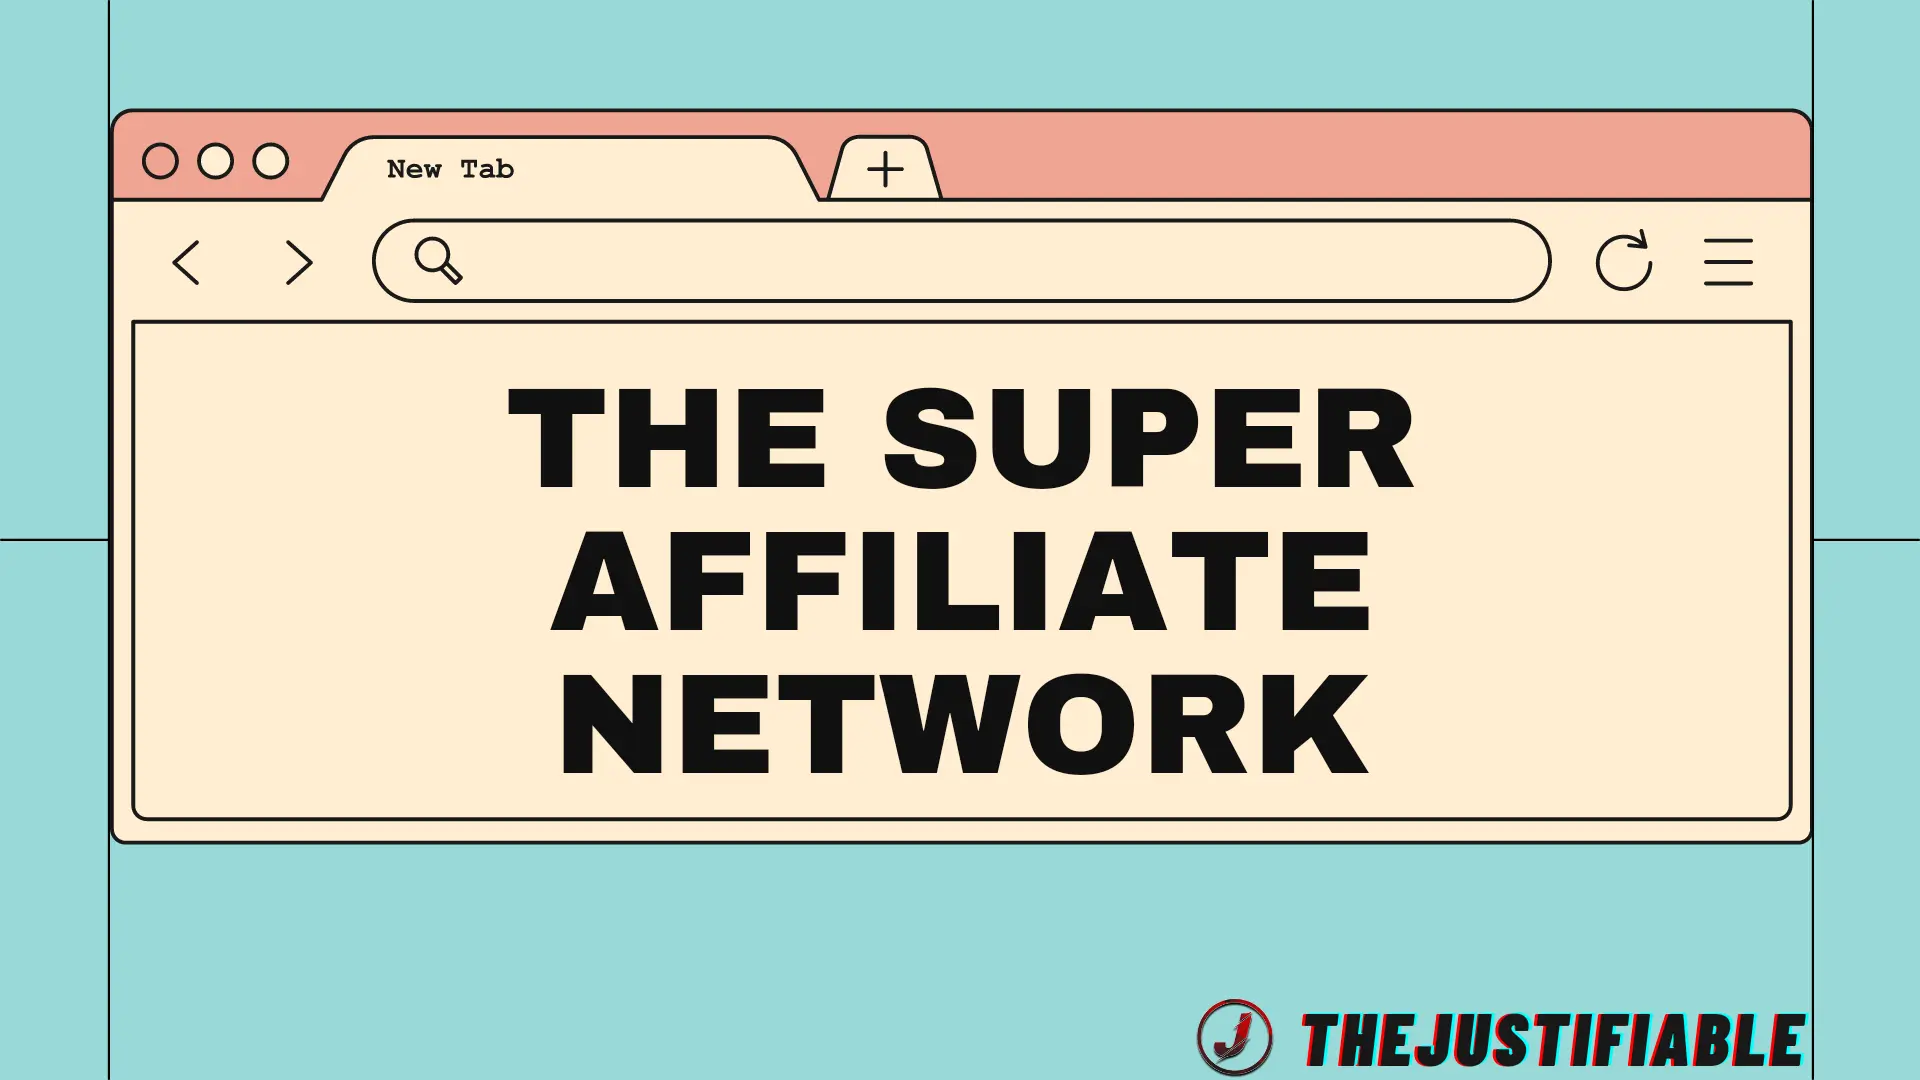 The image is a graphic related to Super Affiliate Network.